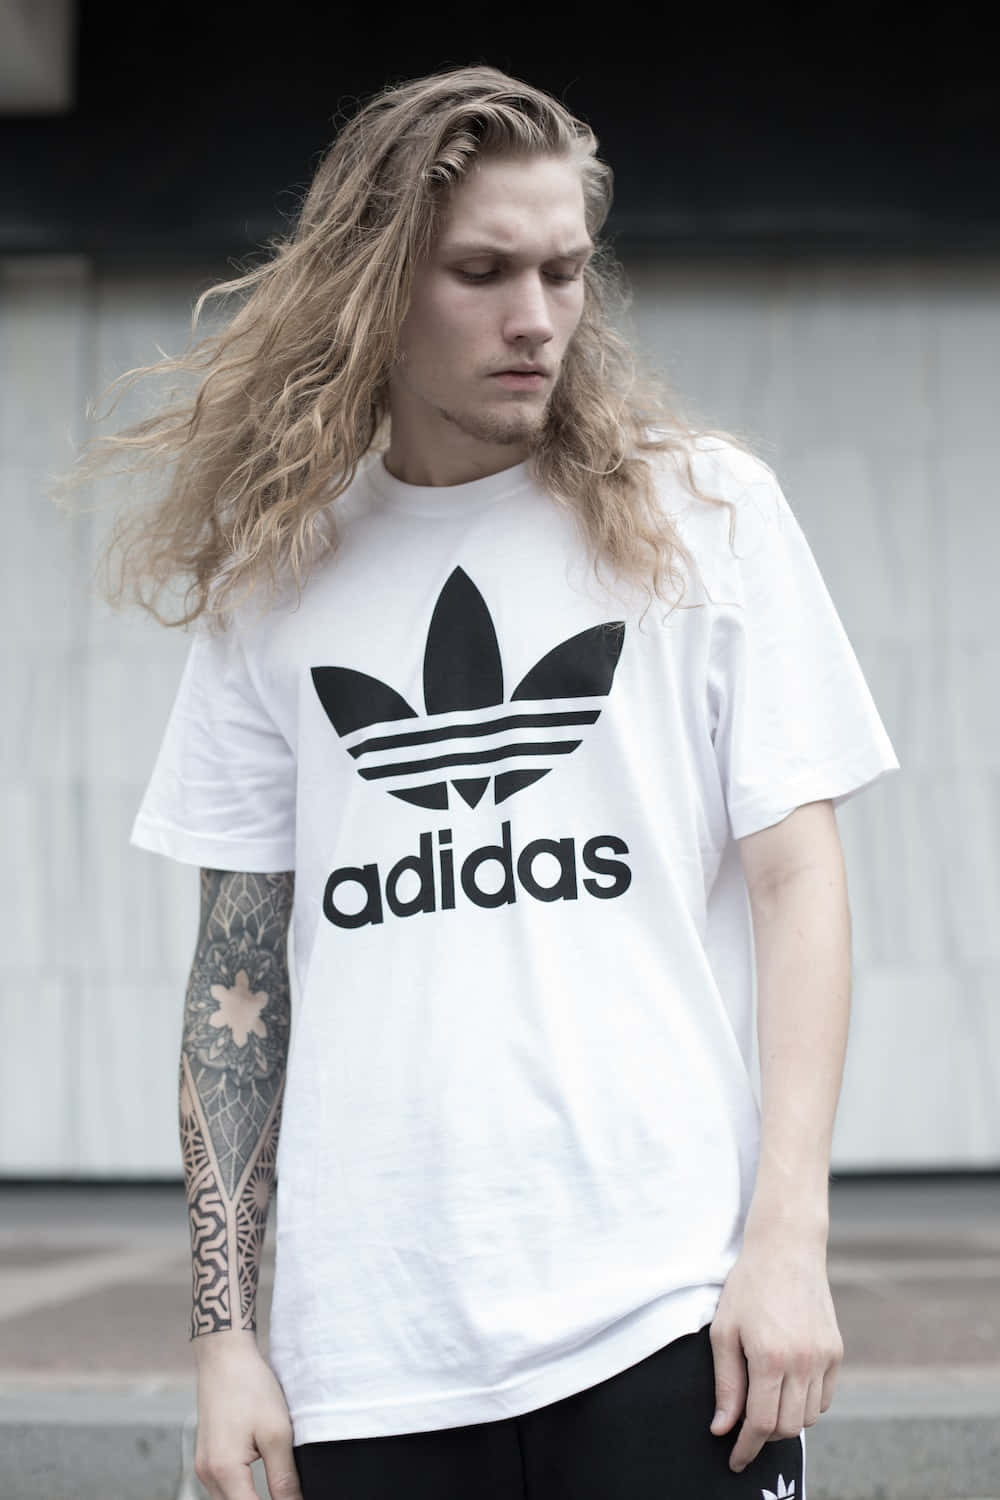 Daring New Look with Adidas